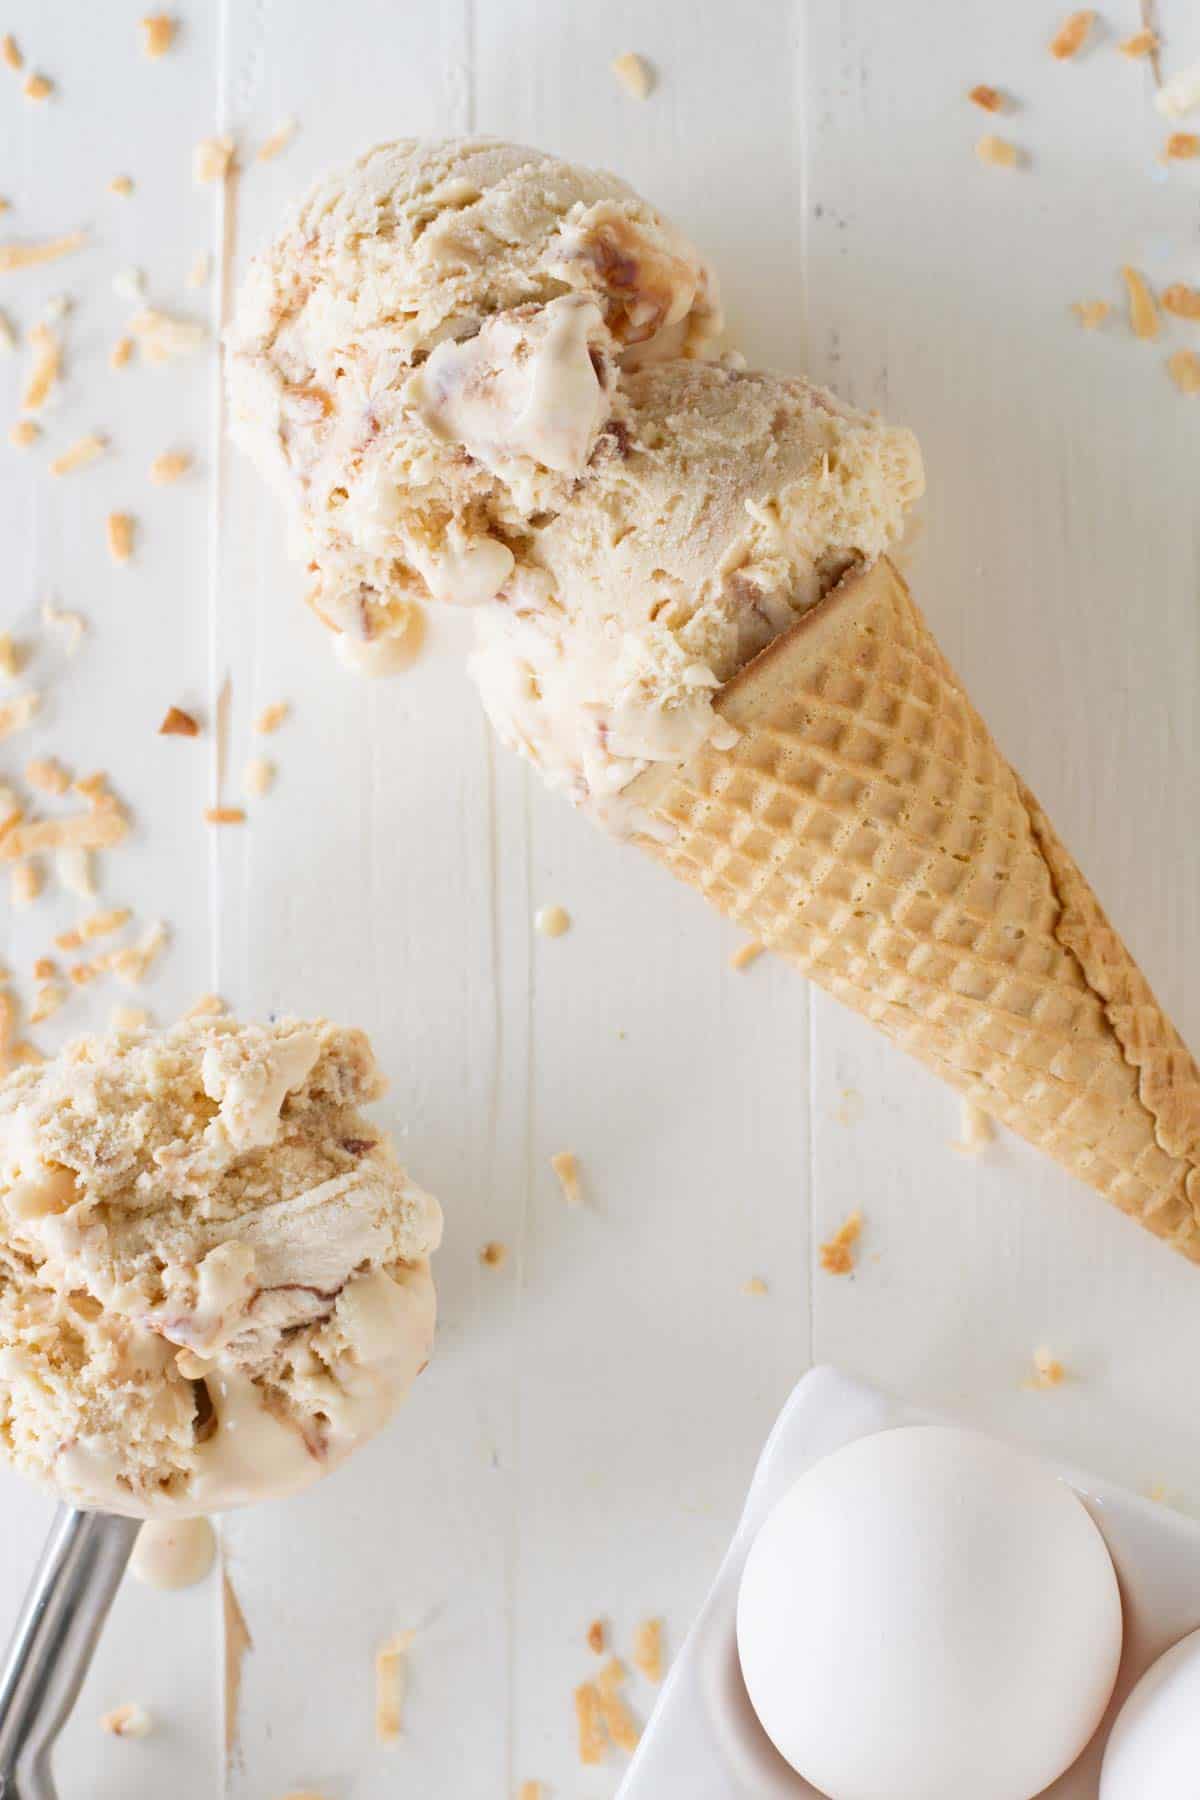 Two scoops of salted caramel ice cream with fudge and toasted coconut on a sugar cone.